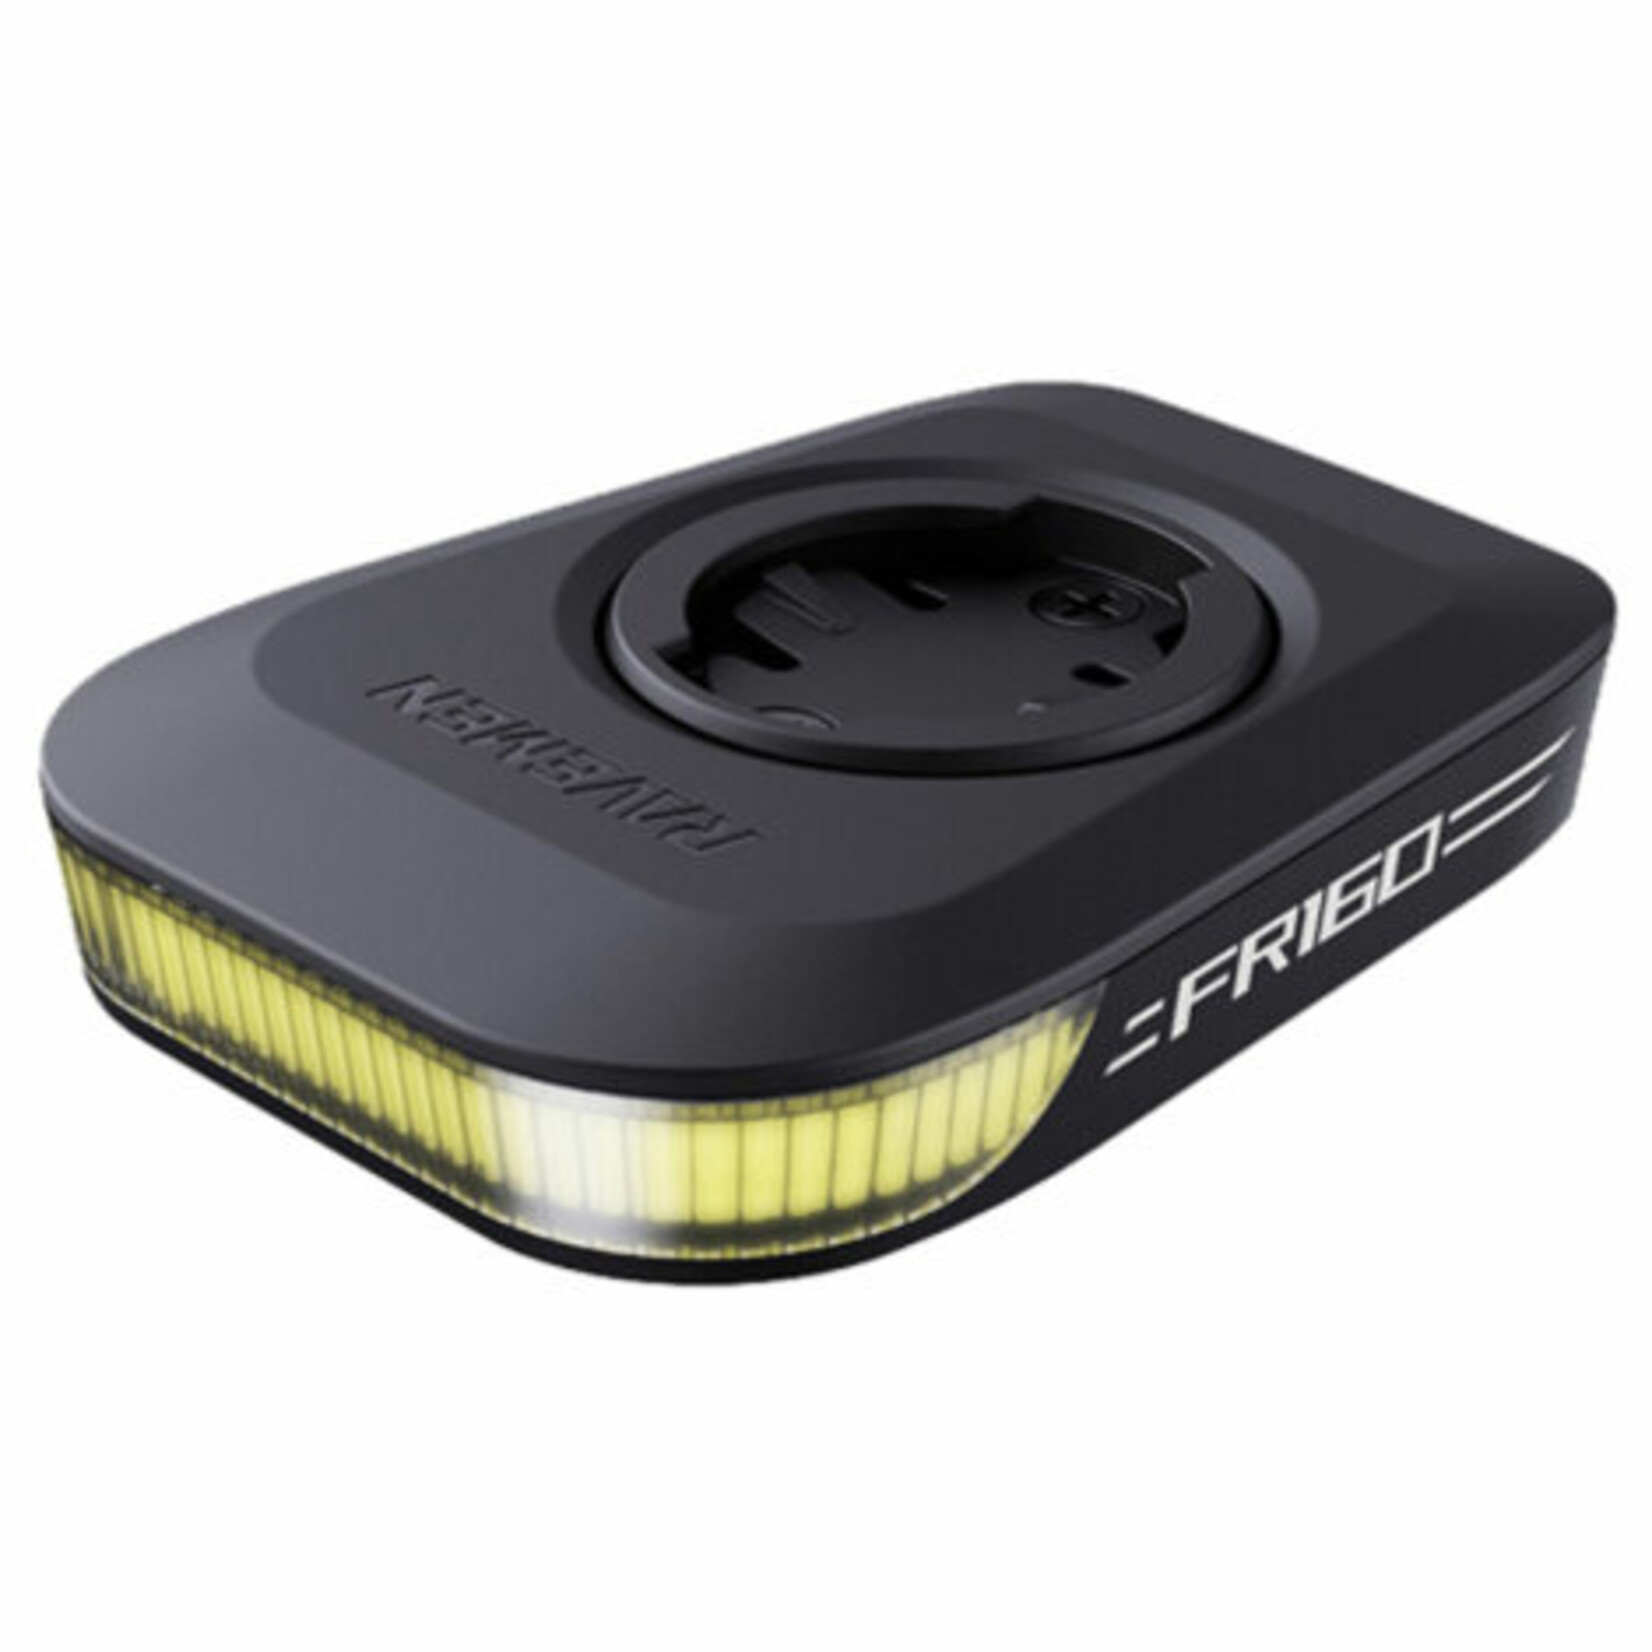 Ravemen Ravemen FR160 USB Rechargeable Out-Front Front Light in Black (160 Lumens) - Compatible with Garmin/Wahoo Mounts)